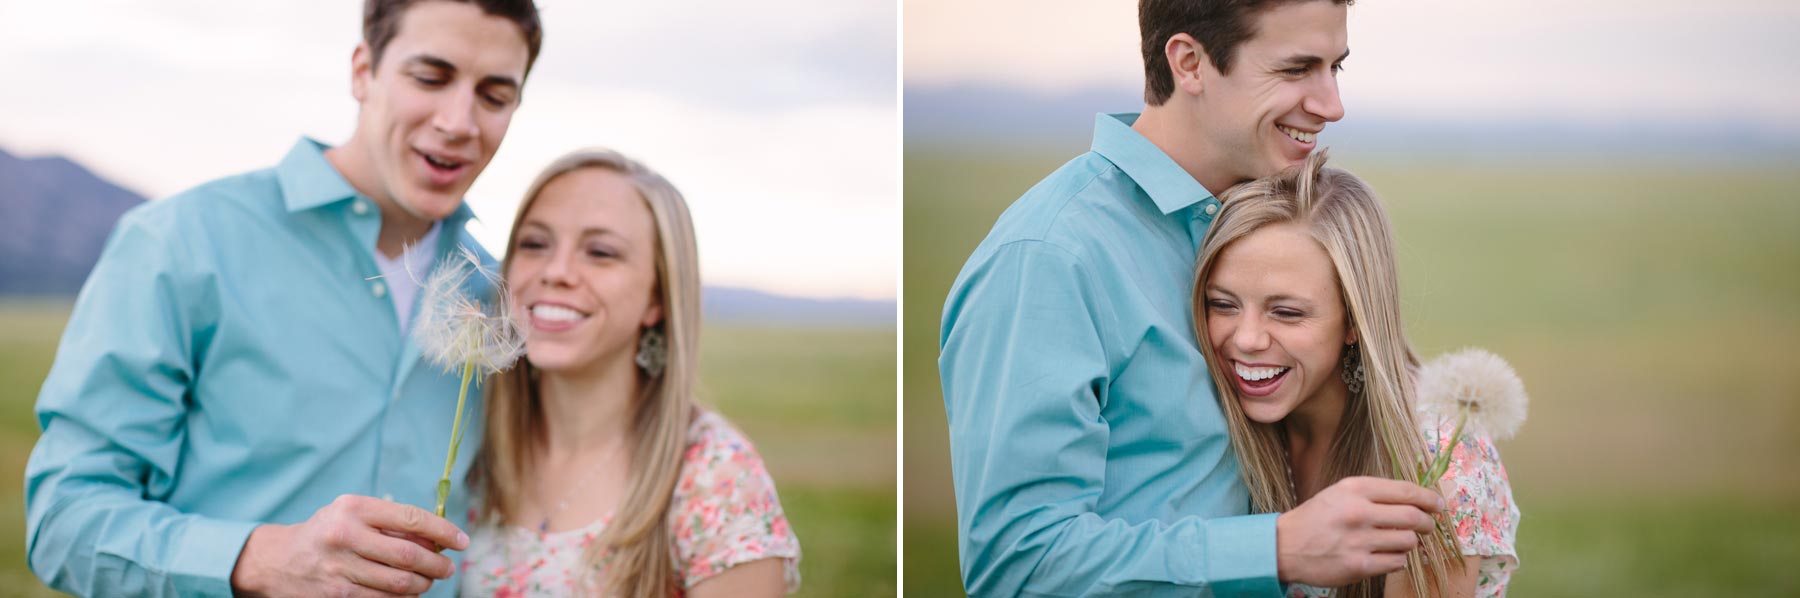 Irivng-Photography-Kerstyn-Korby-Colorado-Engagement-Photographers-017